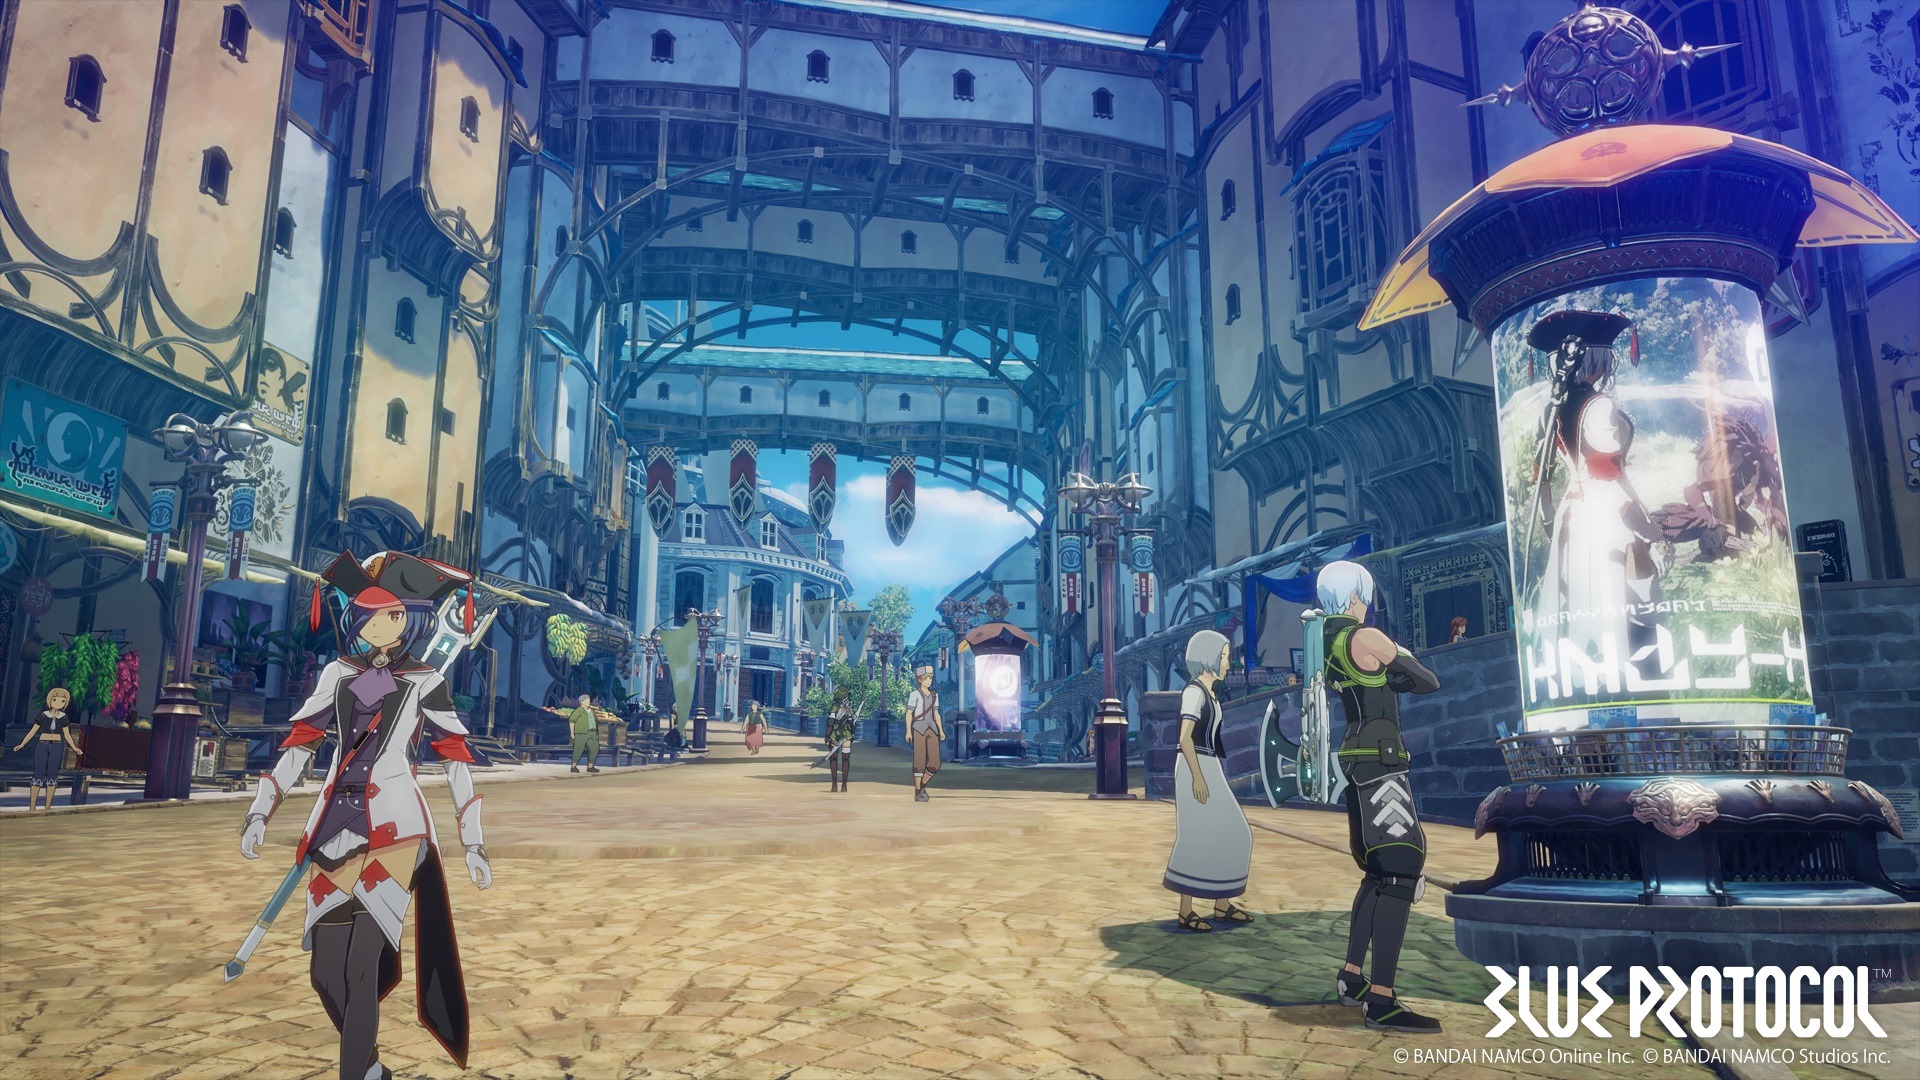 Watch the first trailer for Blue Protocol, Bandai Namco's online action-RPG